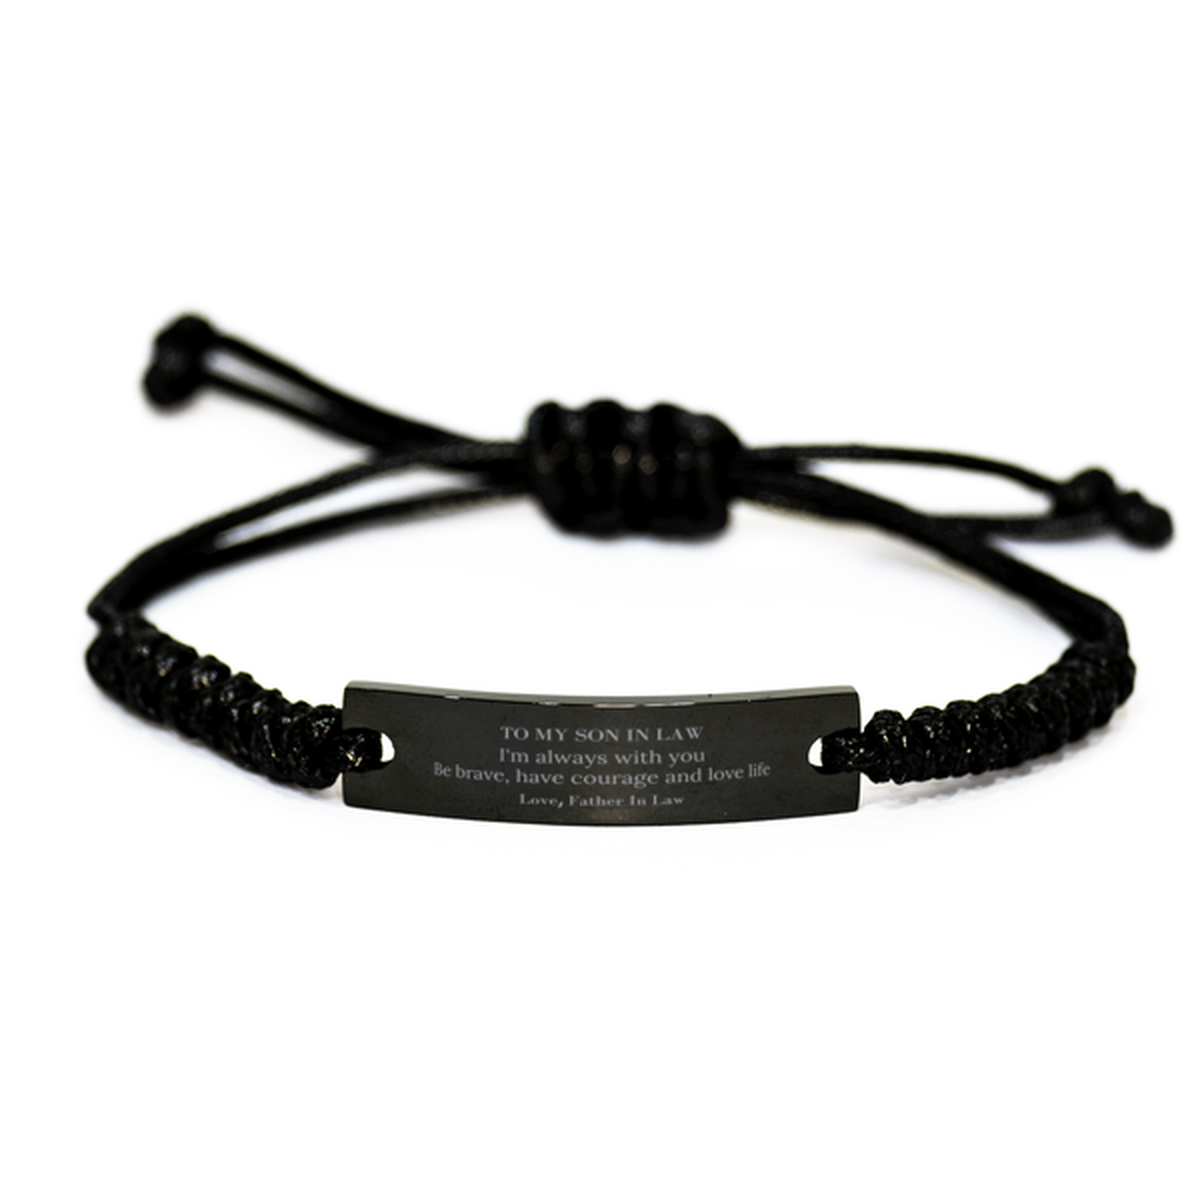 To My Son In Law Gifts from Father In Law, Unique Black Rope Bracelet Inspirational Christmas Birthday Graduation Gifts for Son In Law I'm always with you. Be brave, have courage and love life. Love, Father In Law